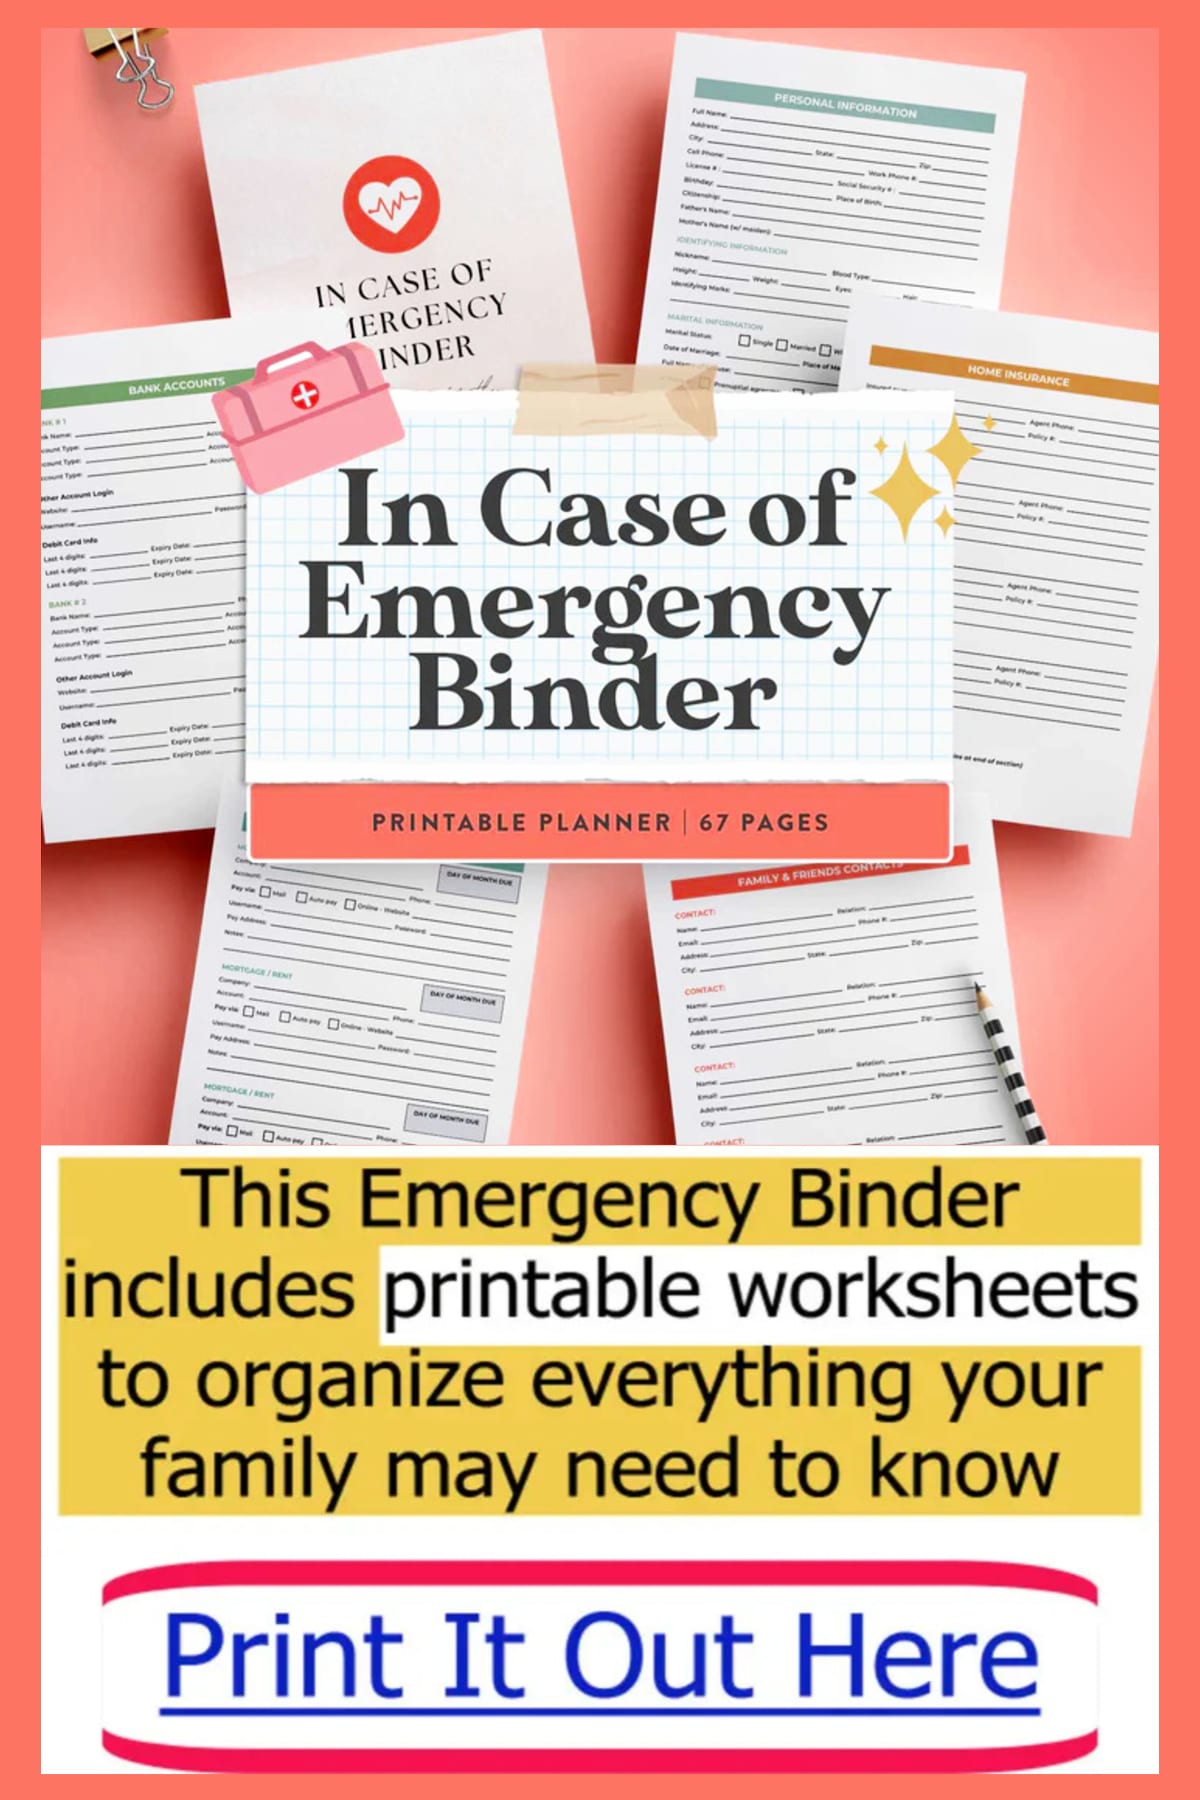 Important document binder printables and checklist for In Case of Emergency - Or Death